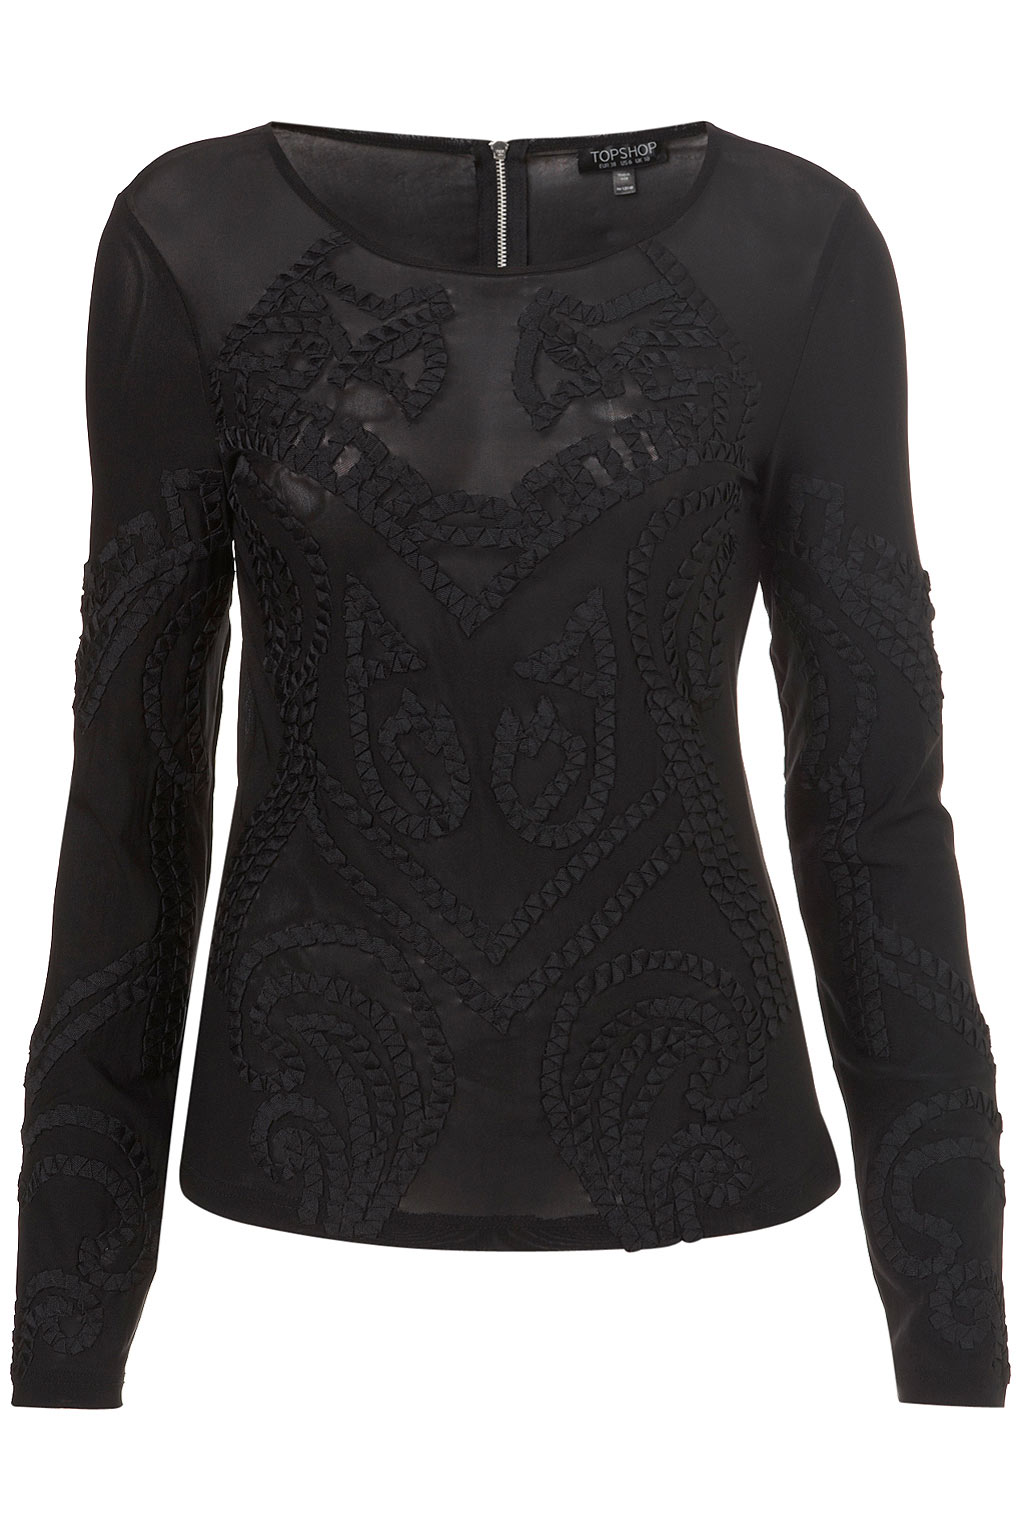 Lyst - Topshop Embroidered Mesh Top in Black